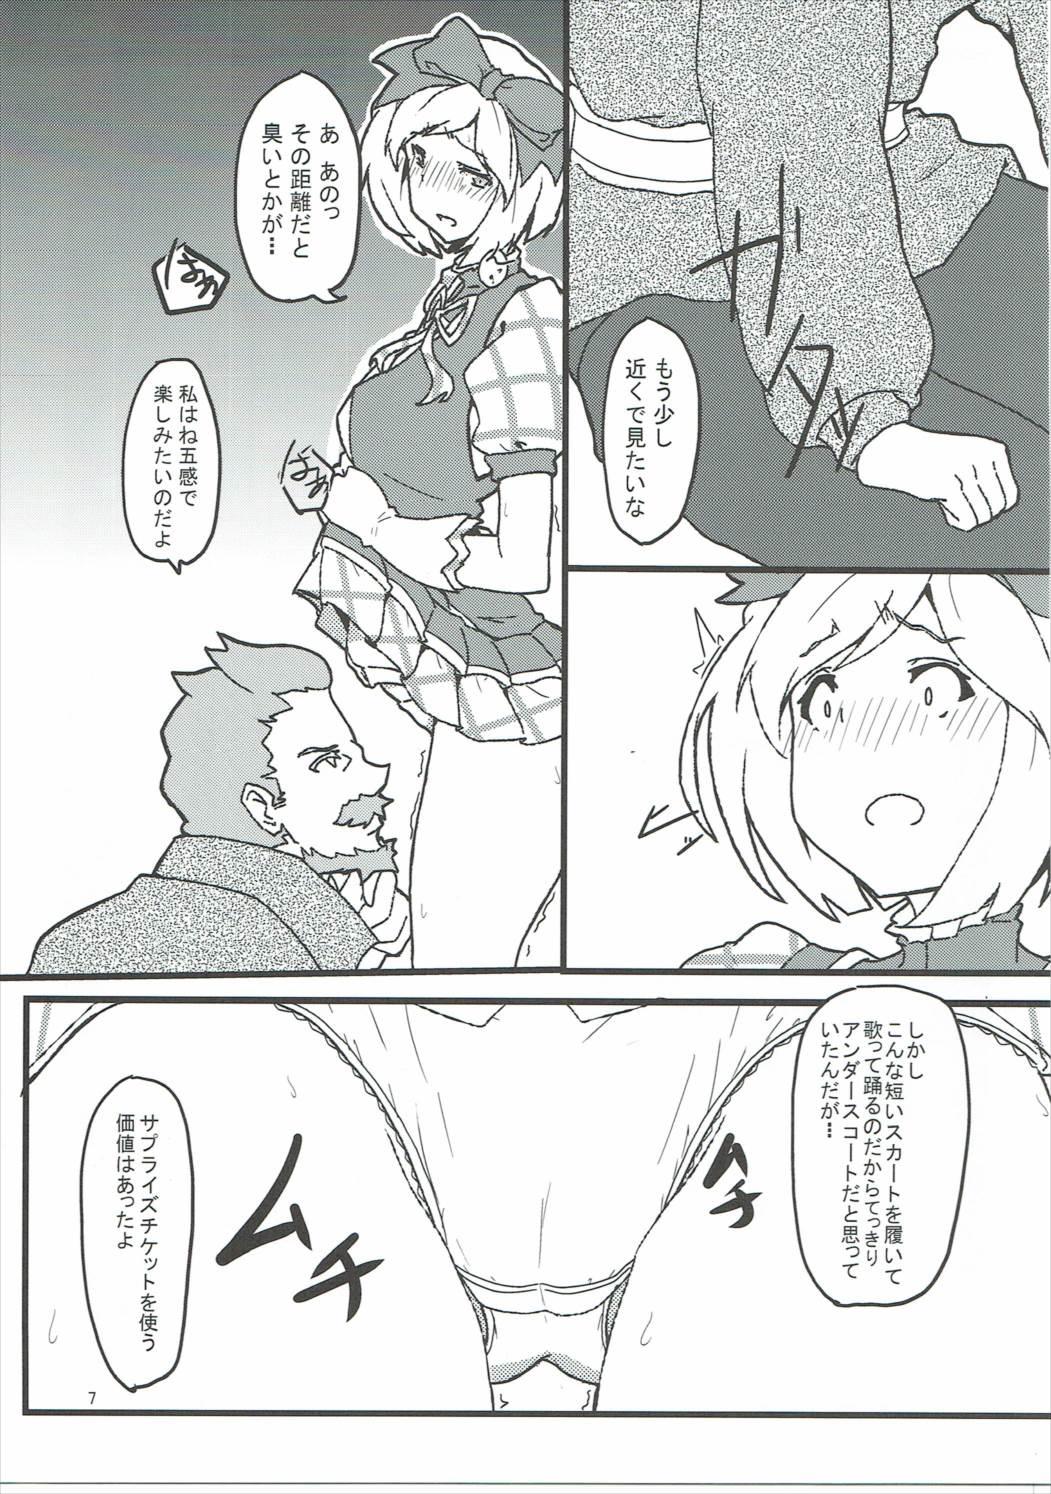 Butts Surprise Ticket - Granblue fantasy Stroking - Page 8